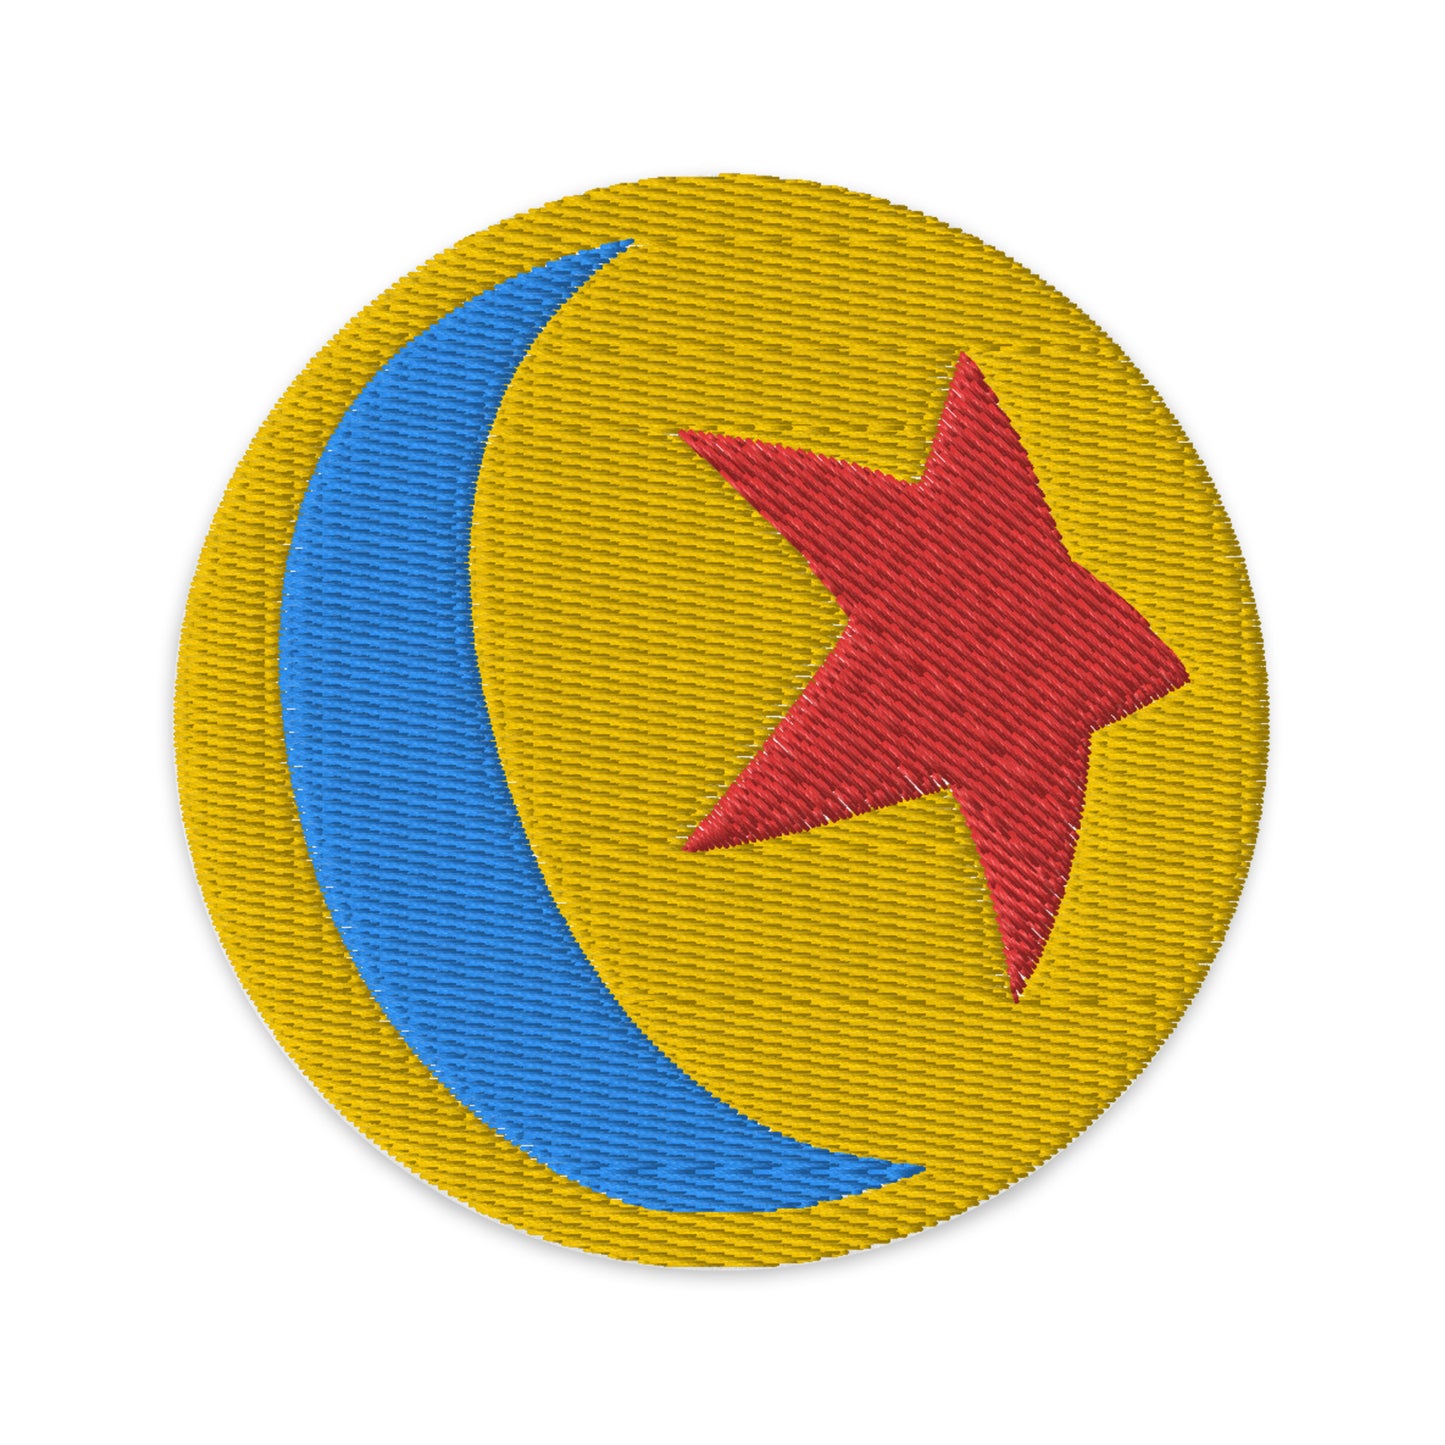 Toy Ball patch